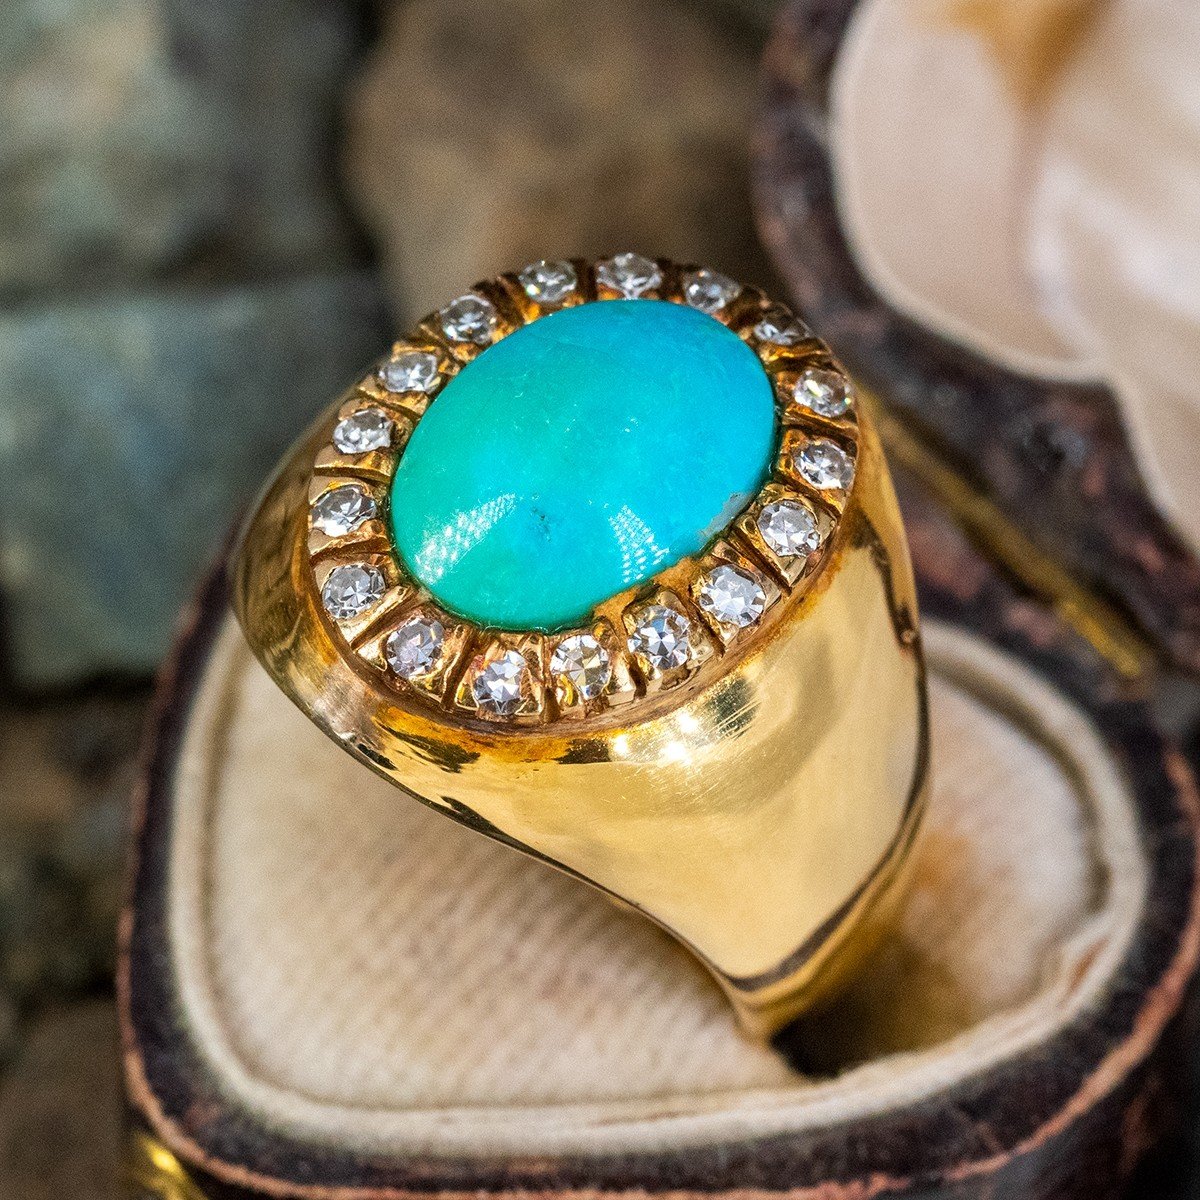 Buy Oval Turquoise Ring, Large oval turquoise silver ring online at  aStudio1980.com